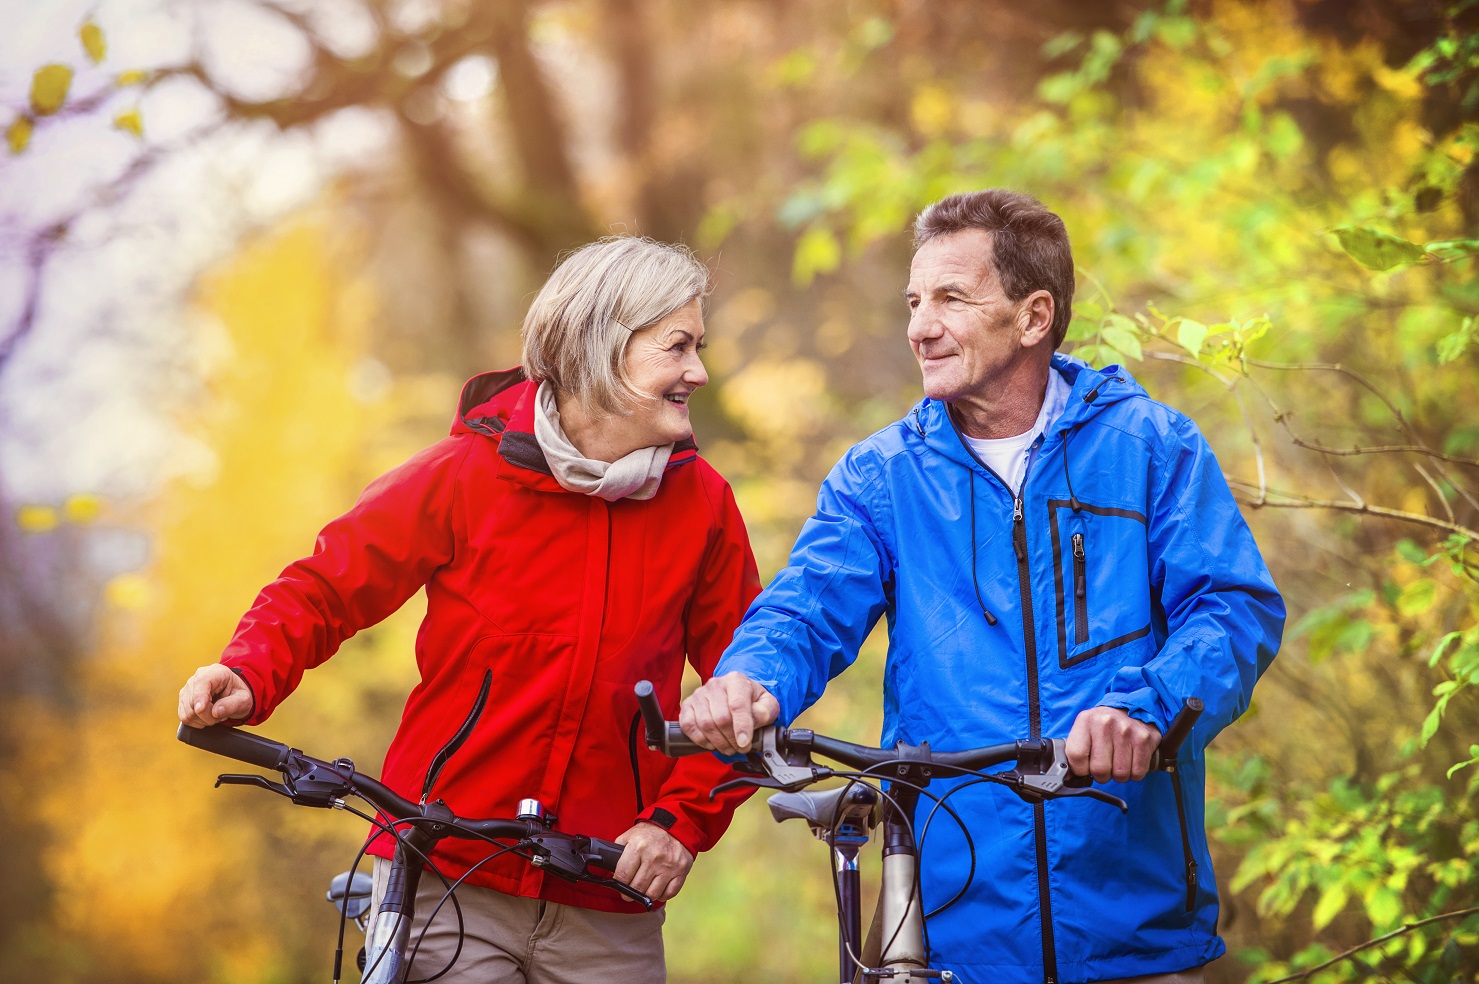 A smiling woman wearing a red windbreaker and a smiling man with a red windbreaker walk with their bicycles